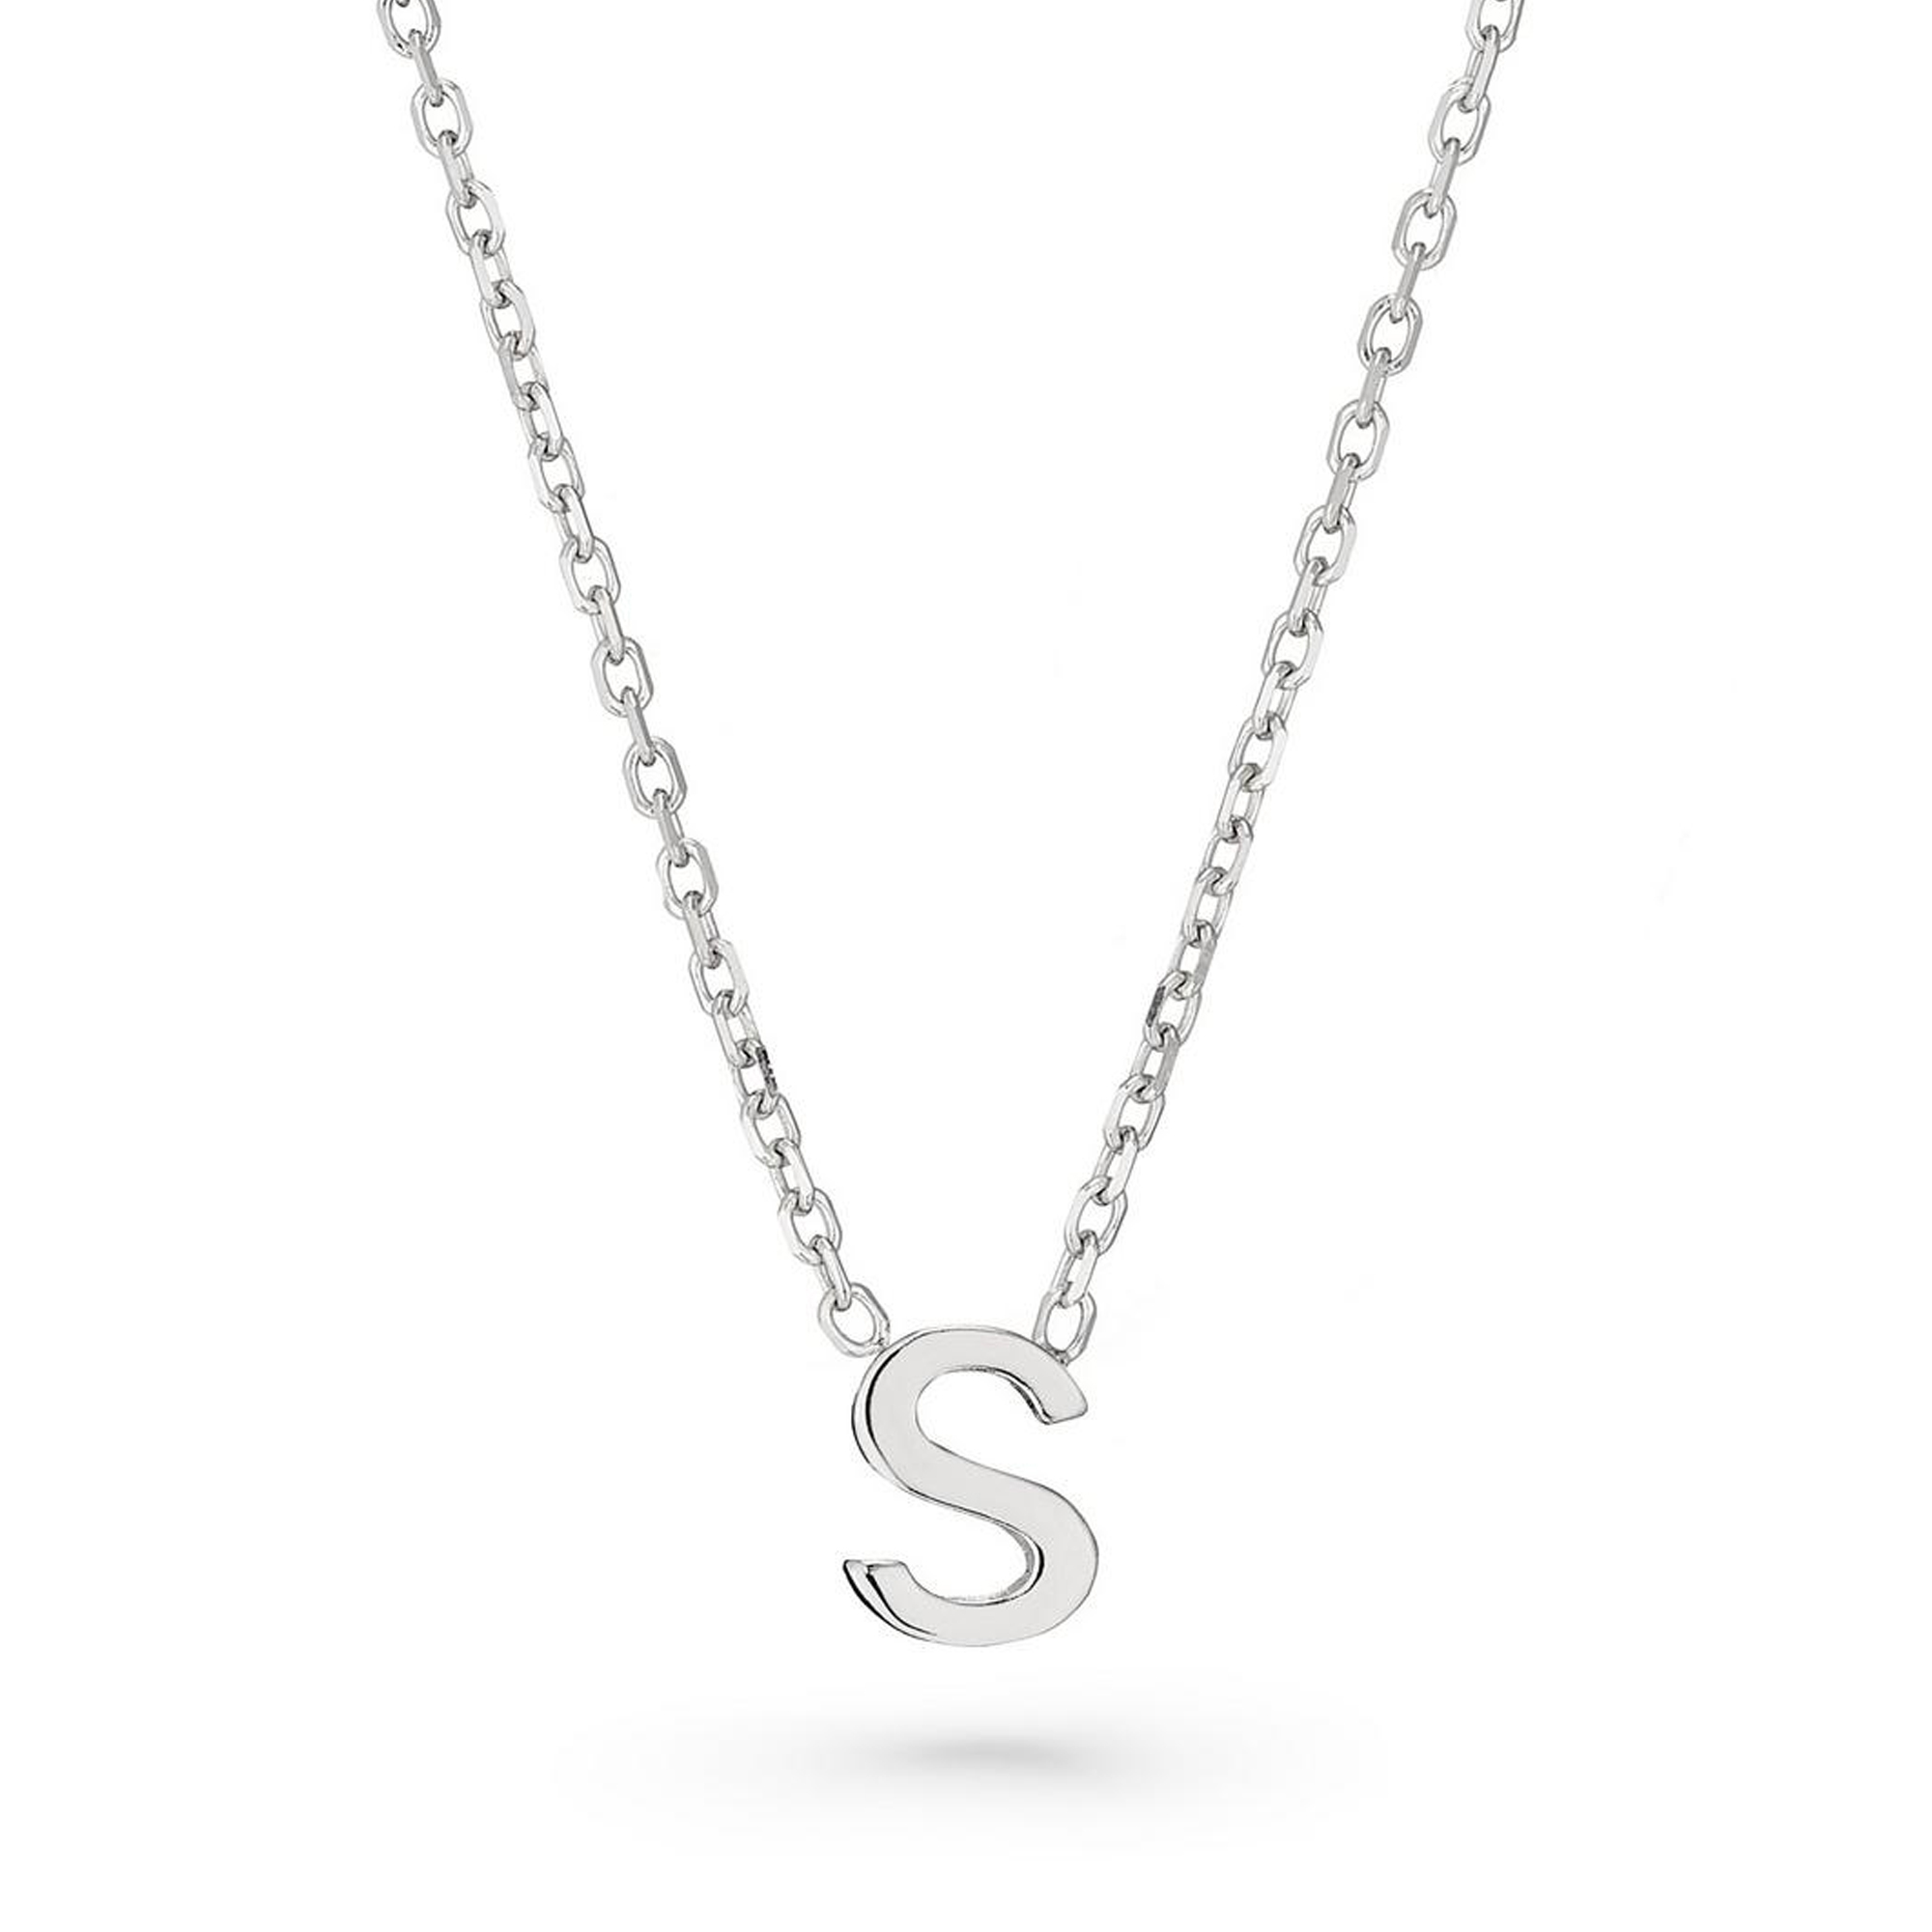 Silver Petite Initial S Necklace